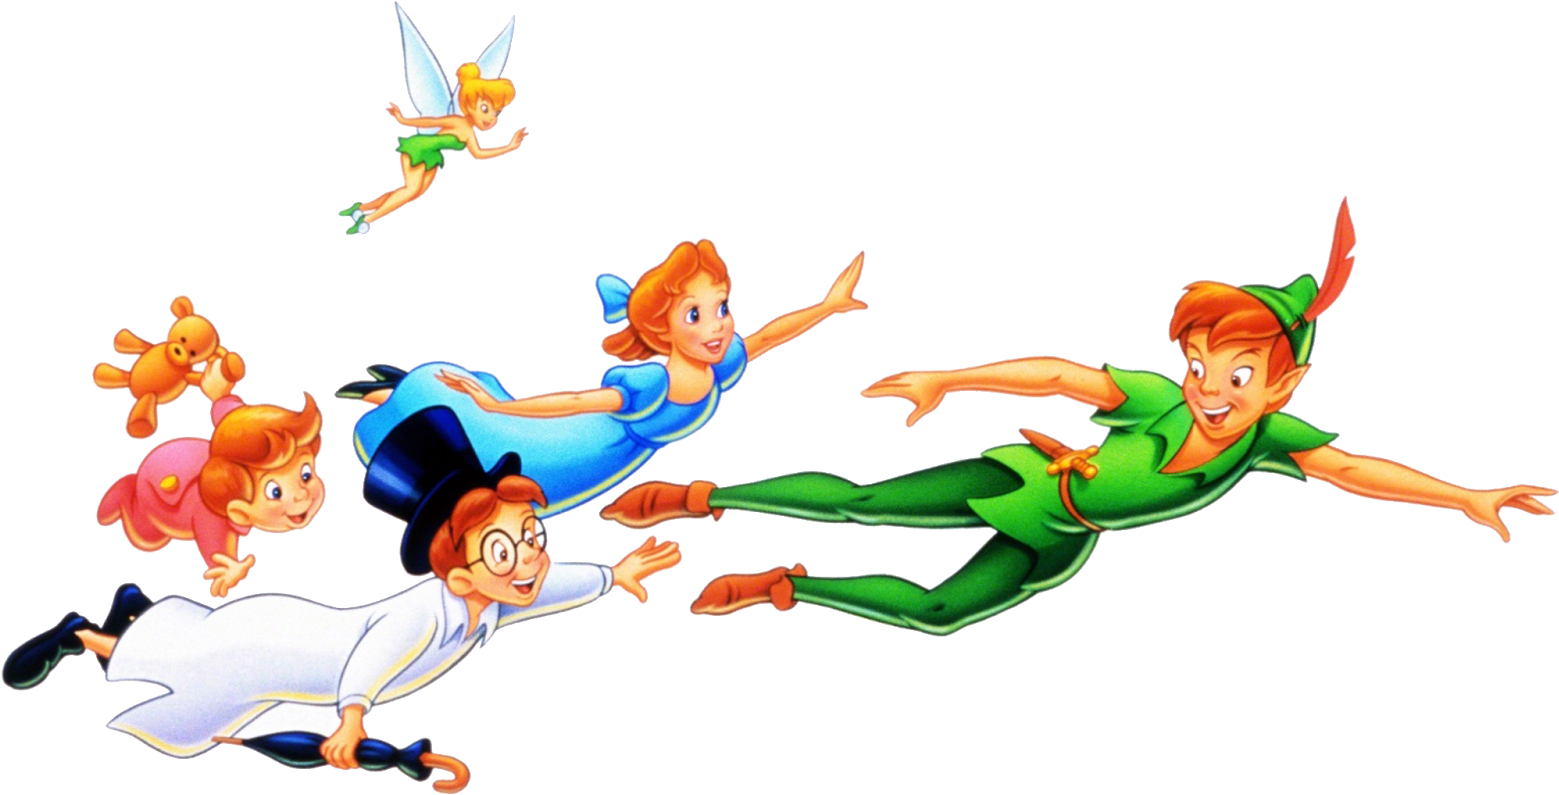 Peter Pan Flying Background Image PNG